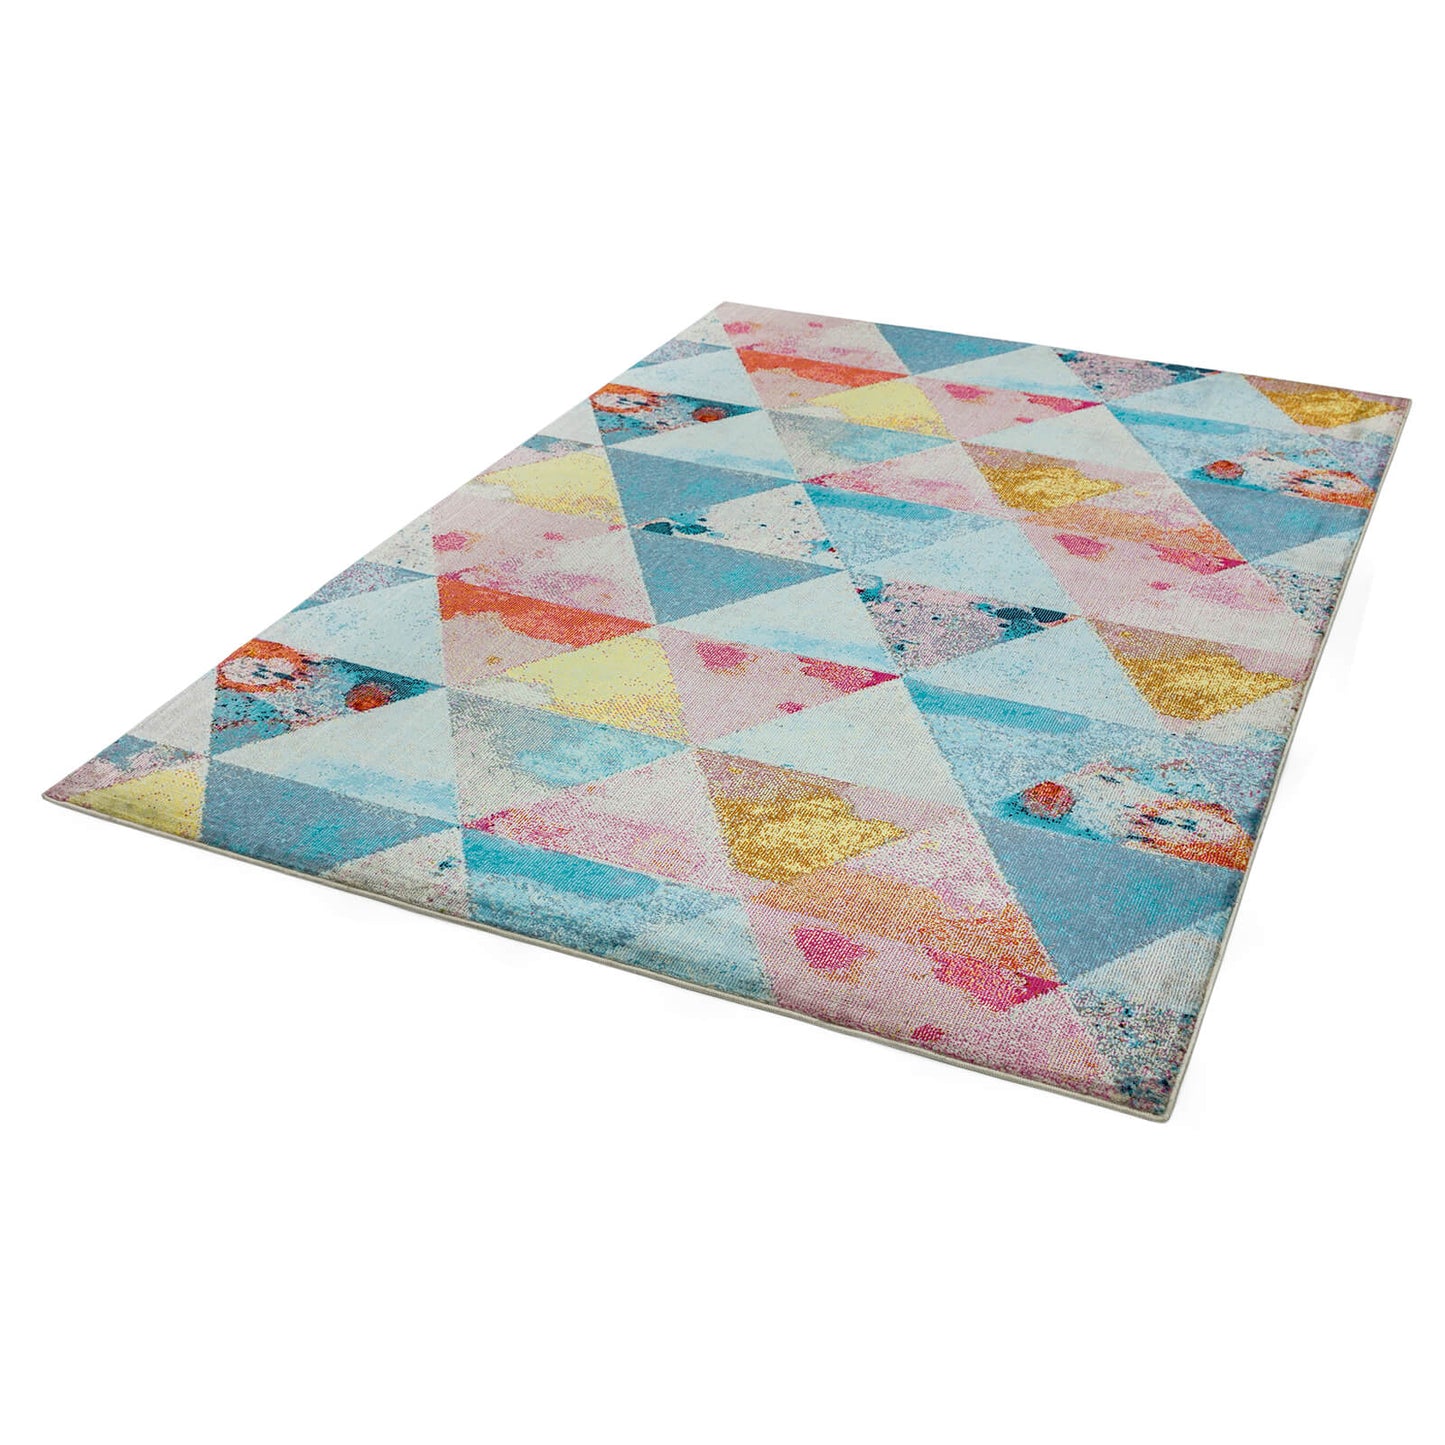 Asiatic Amelie AM03 Triangles Rug